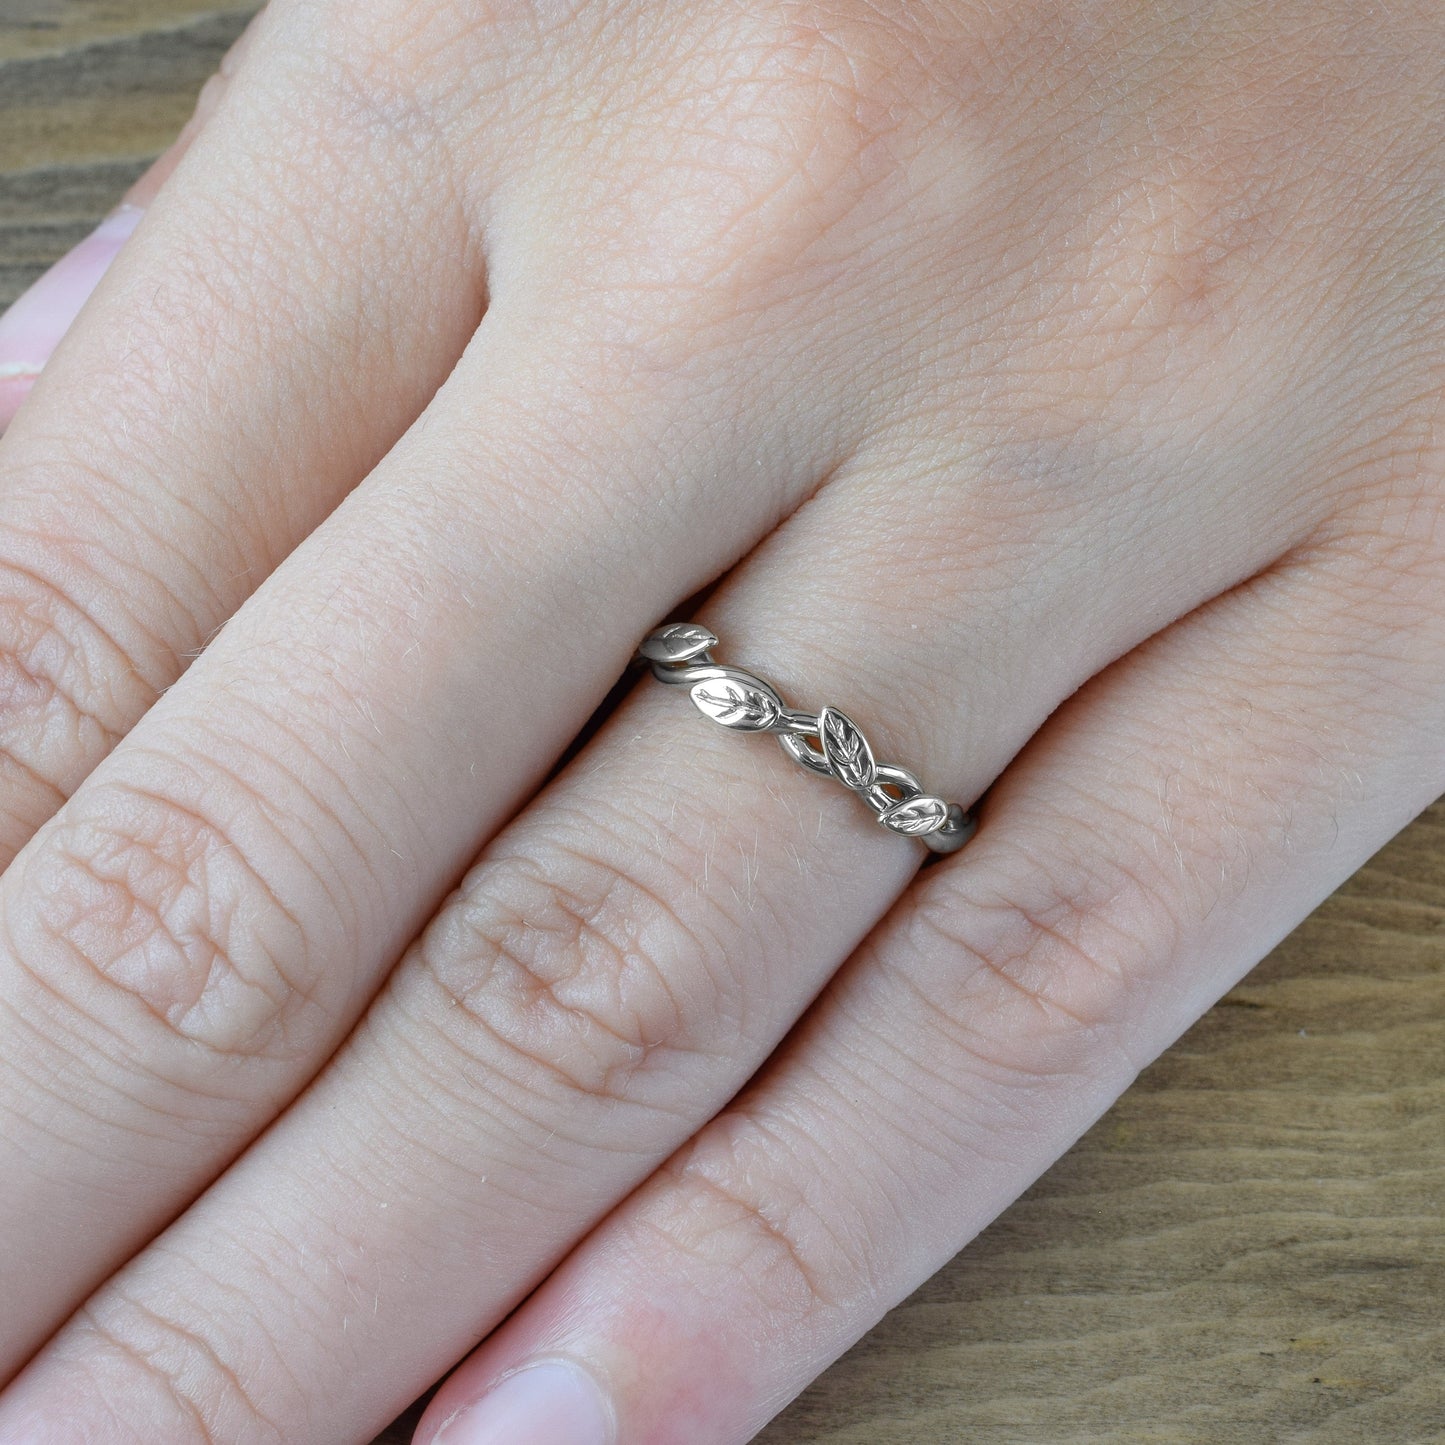 Nature inspired ring with leaves in white gold on finger